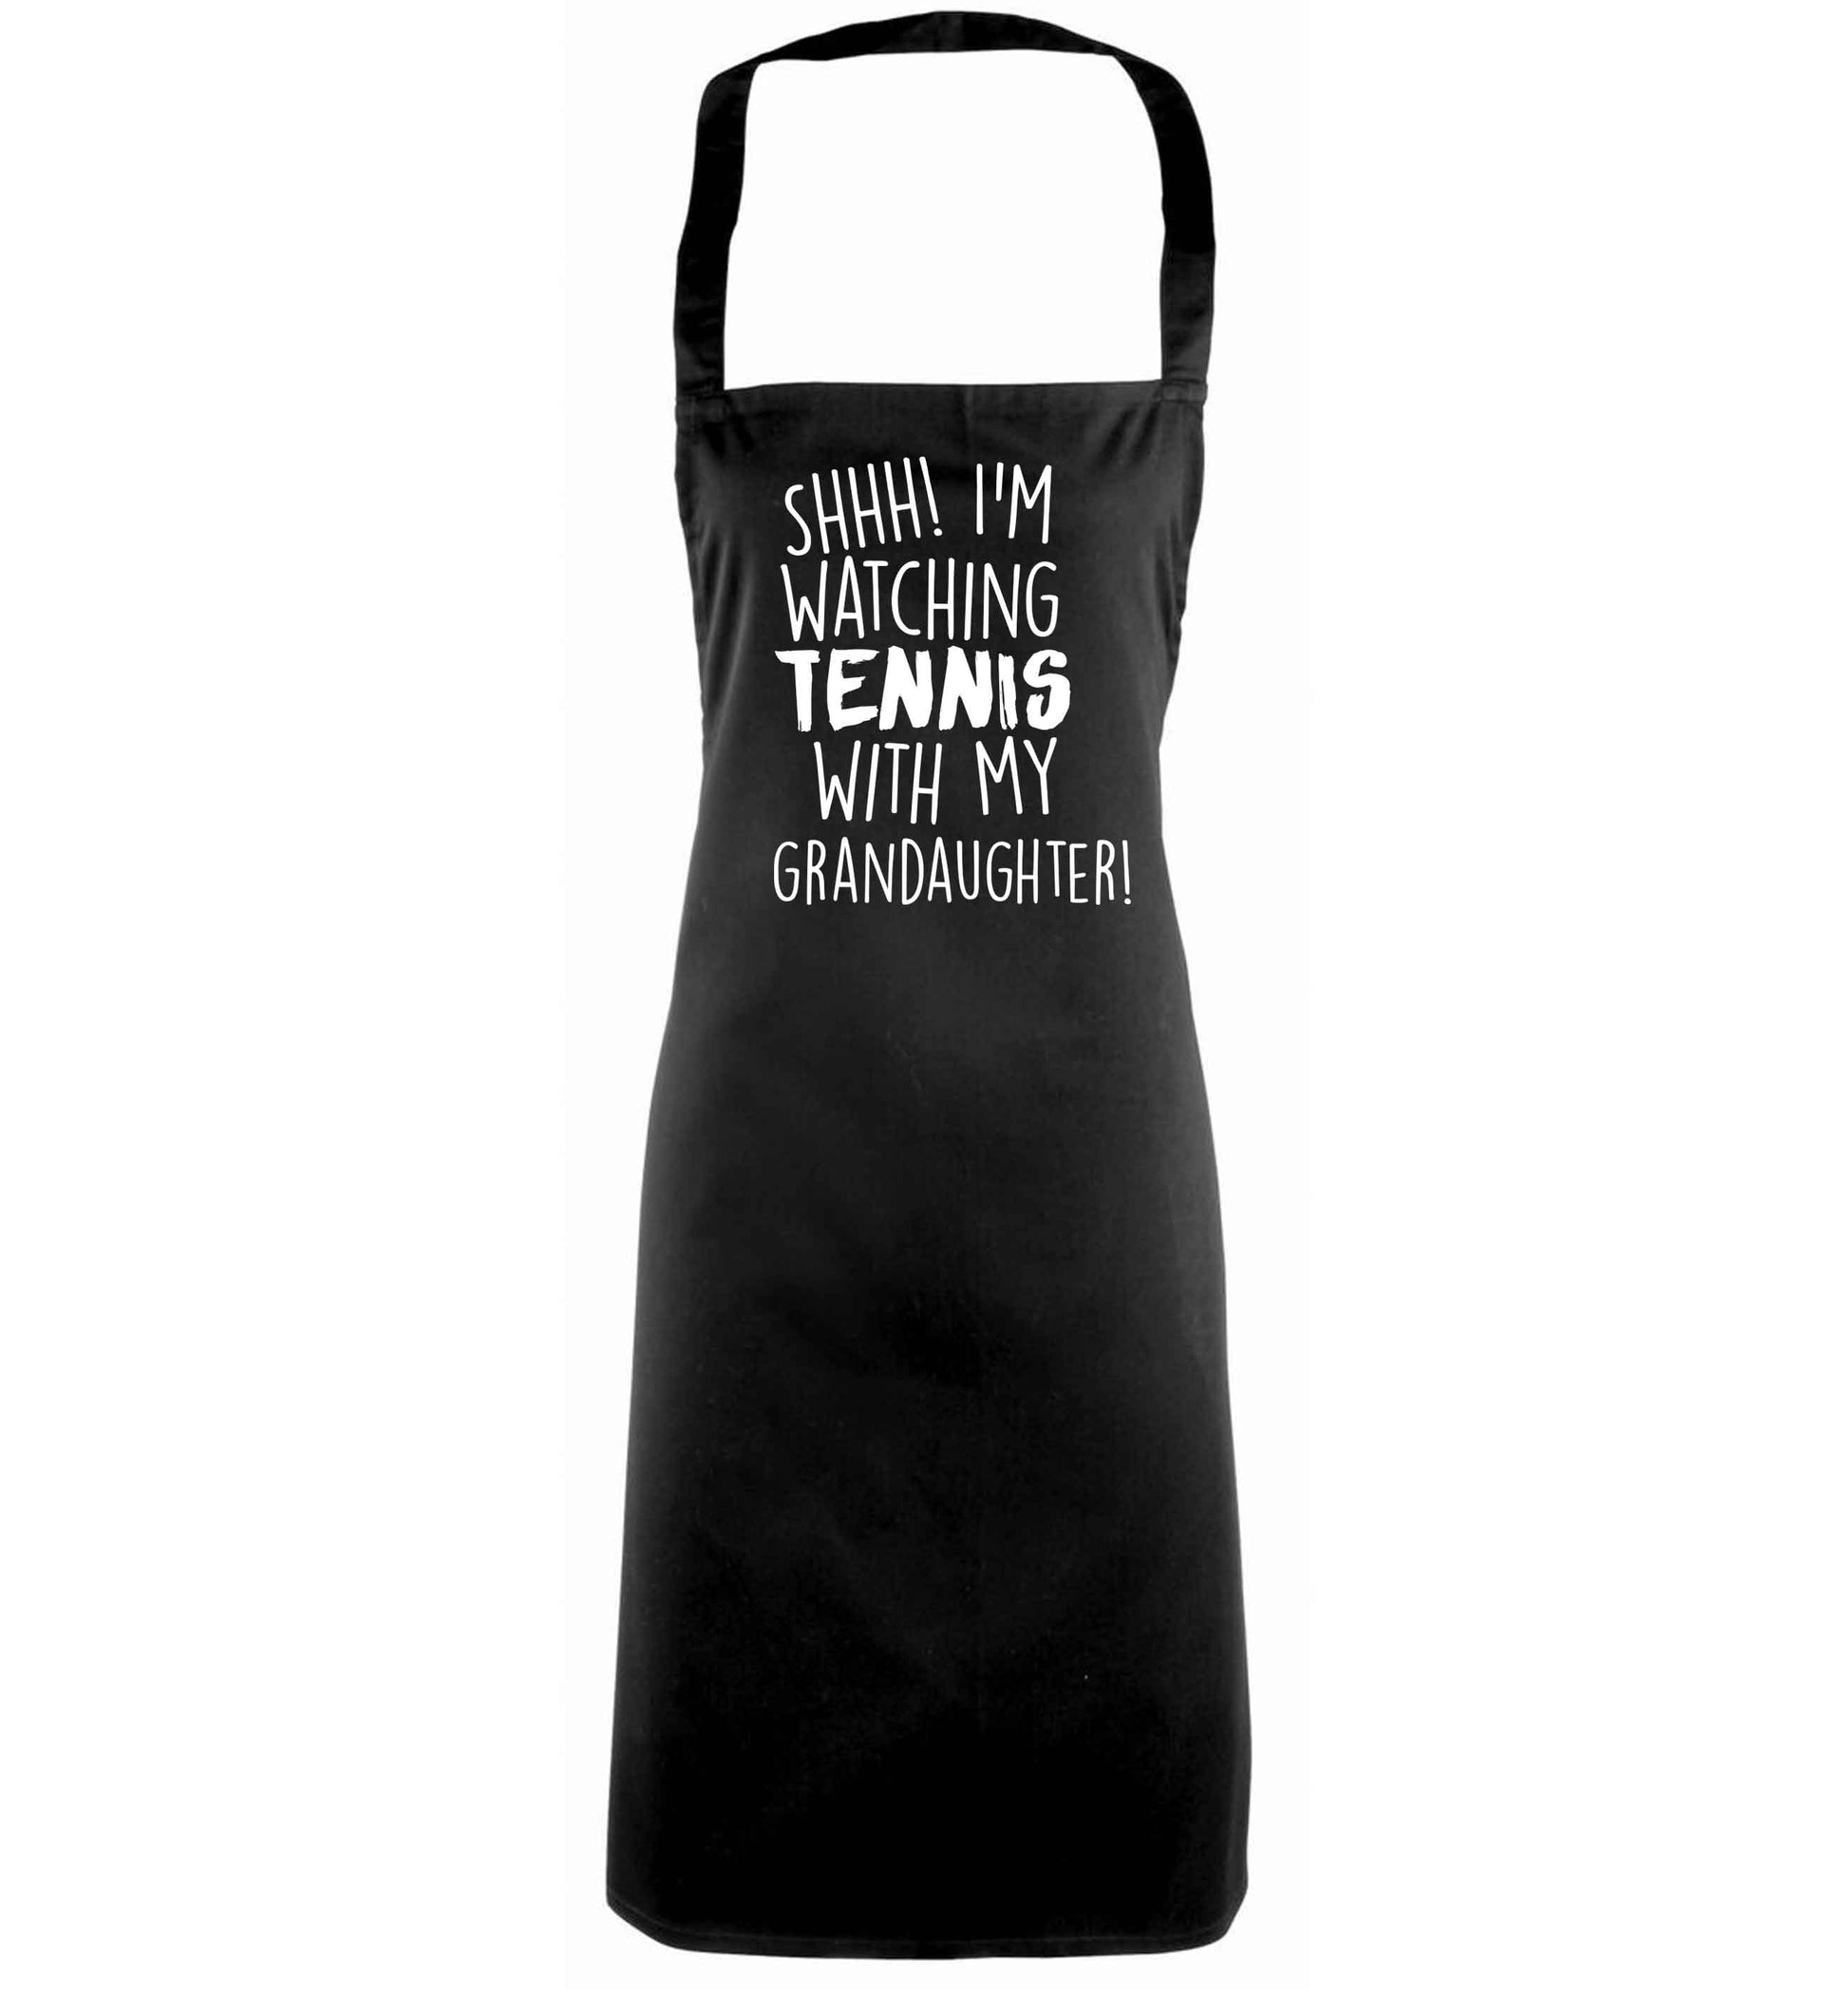 Shh! I'm watching tennis with my granddaughter! black apron